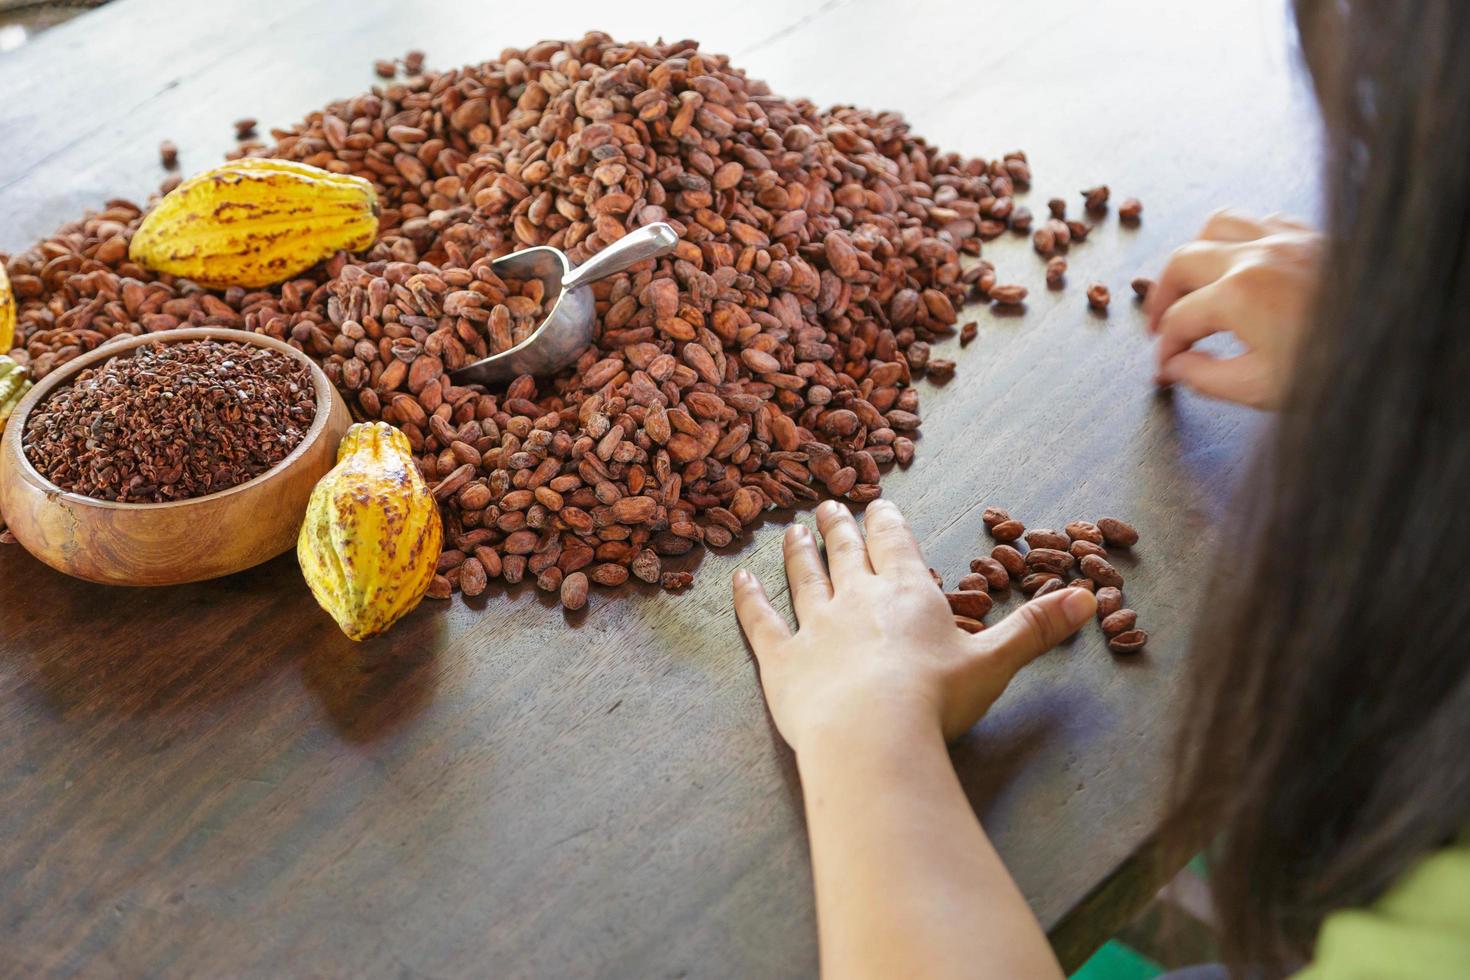 inspecting cocoa beans for quality by hand photo